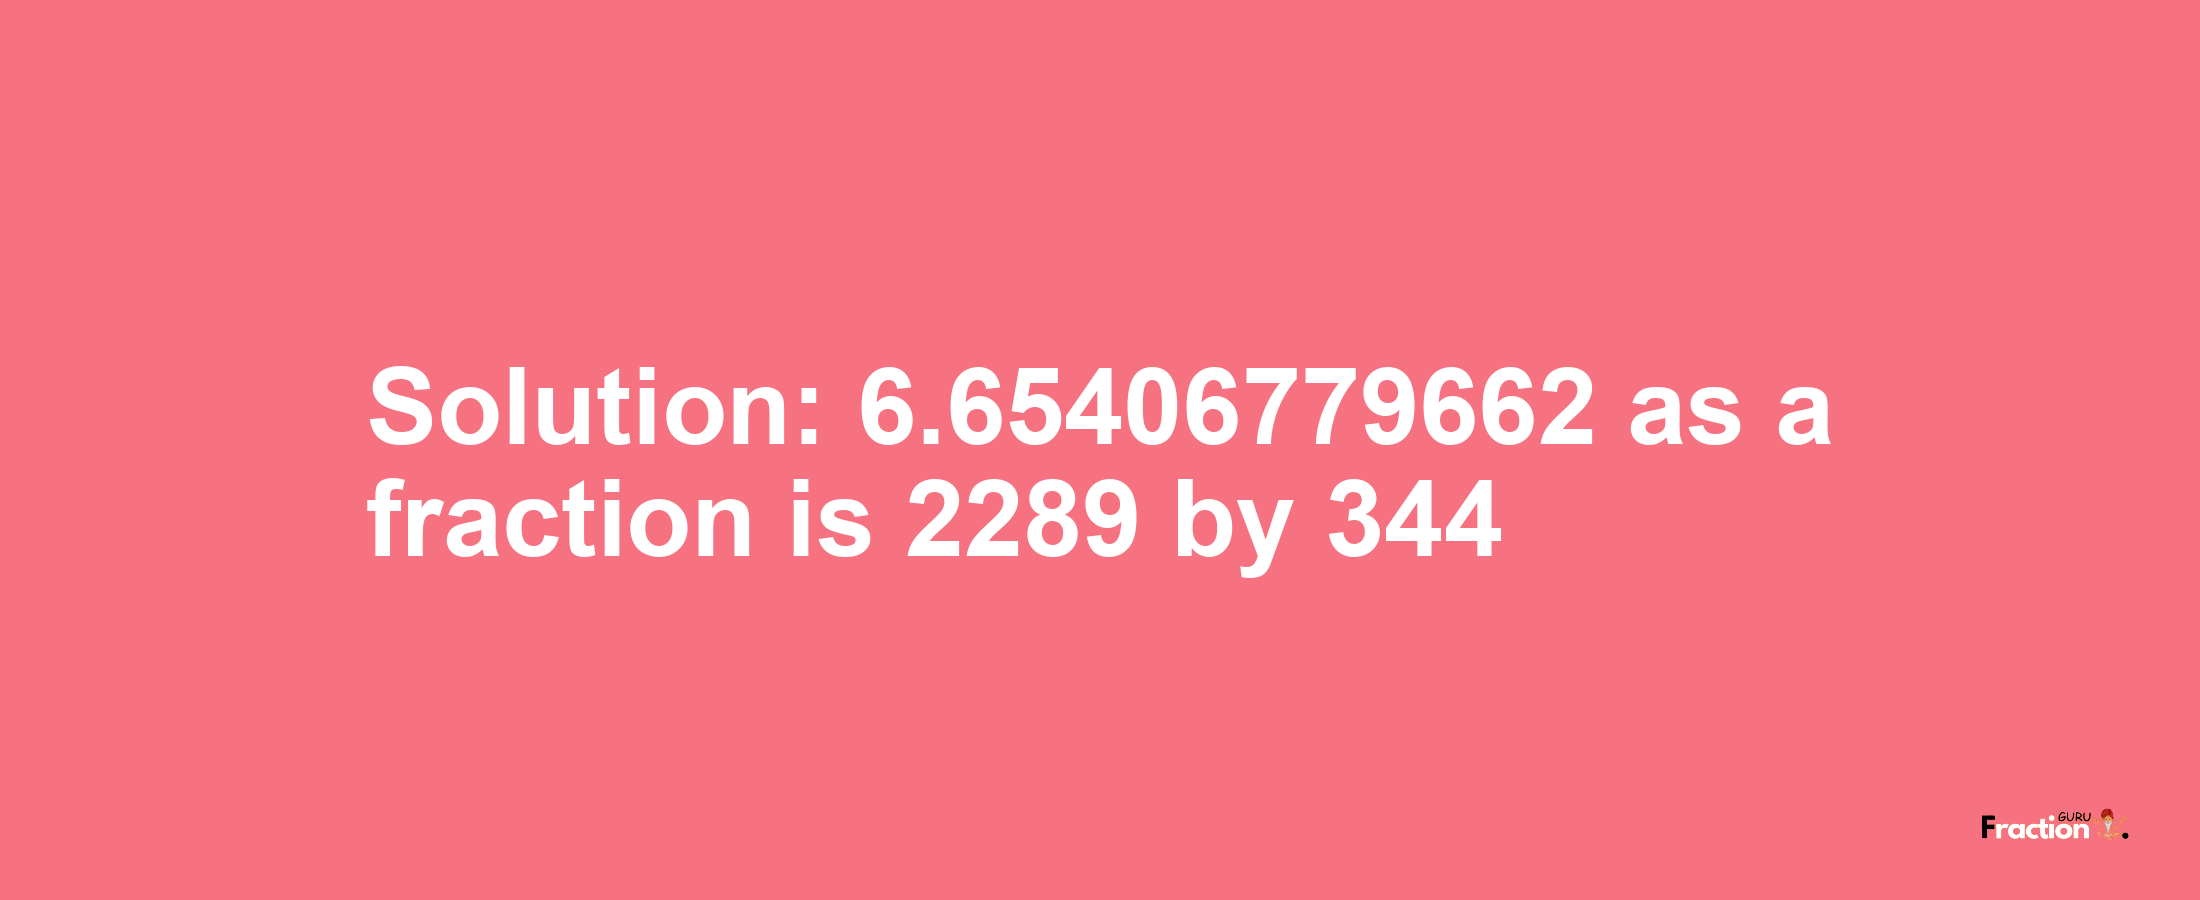 Solution:6.65406779662 as a fraction is 2289/344